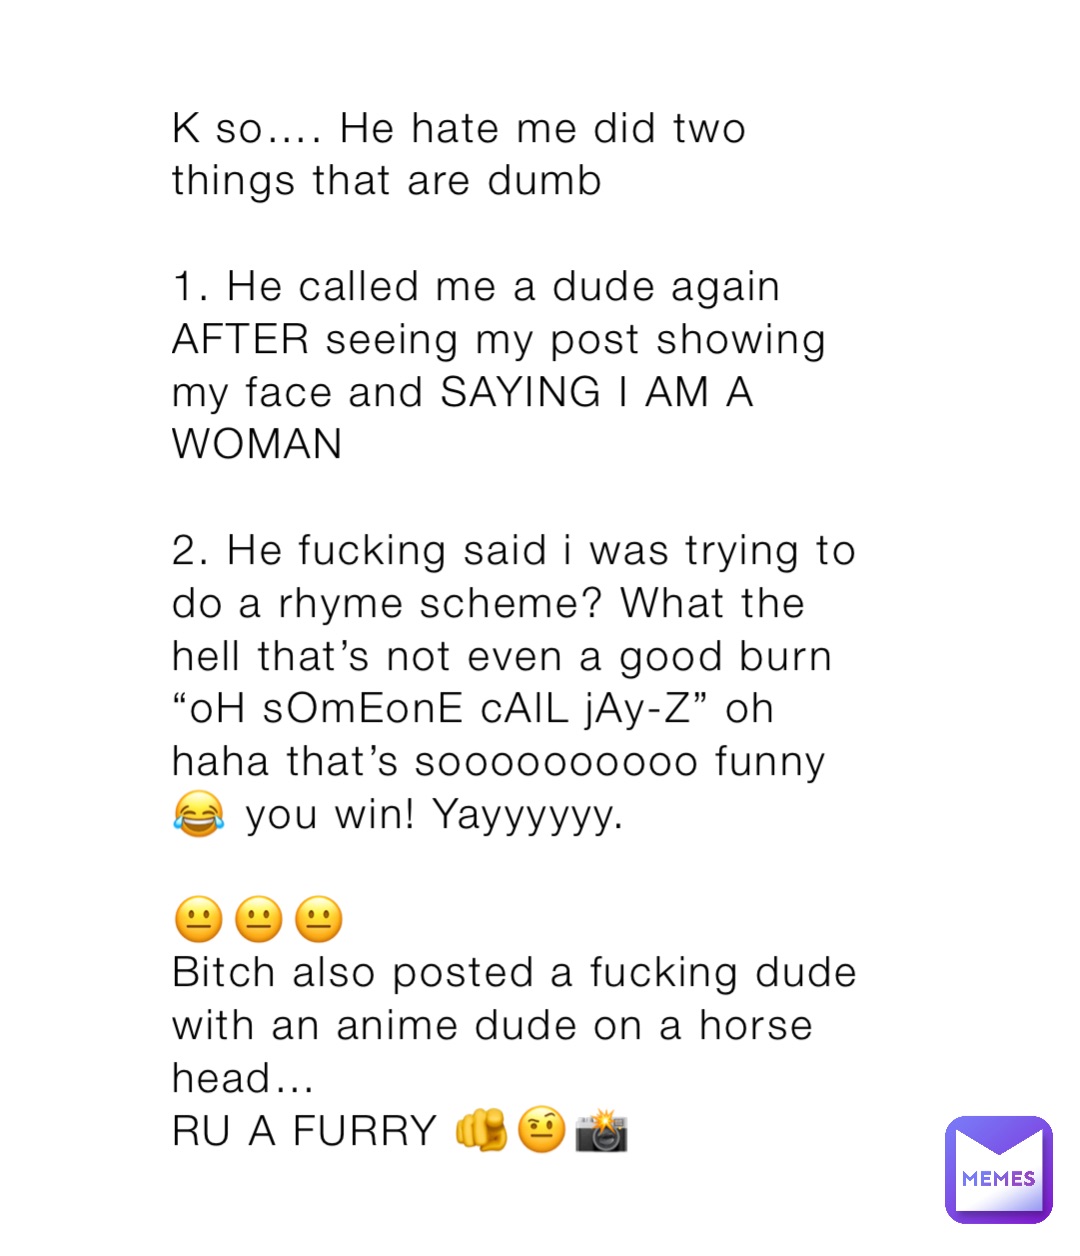 K so…. He hate me did two things that are dumb

1. He called me a dude again AFTER seeing my post showing my face and SAYING I AM A WOMAN

2. He fucking said i was trying to do a rhyme scheme? What the hell that’s not even a good burn “oH sOmEonE cAlL jAy-Z” oh haha that’s soooooooooo funny 😂 you win! Yayyyyyy. 

😐😐😐
Bitch also posted a fucking dude with an anime dude on a horse head…
RU A FURRY 🫵🤨📸